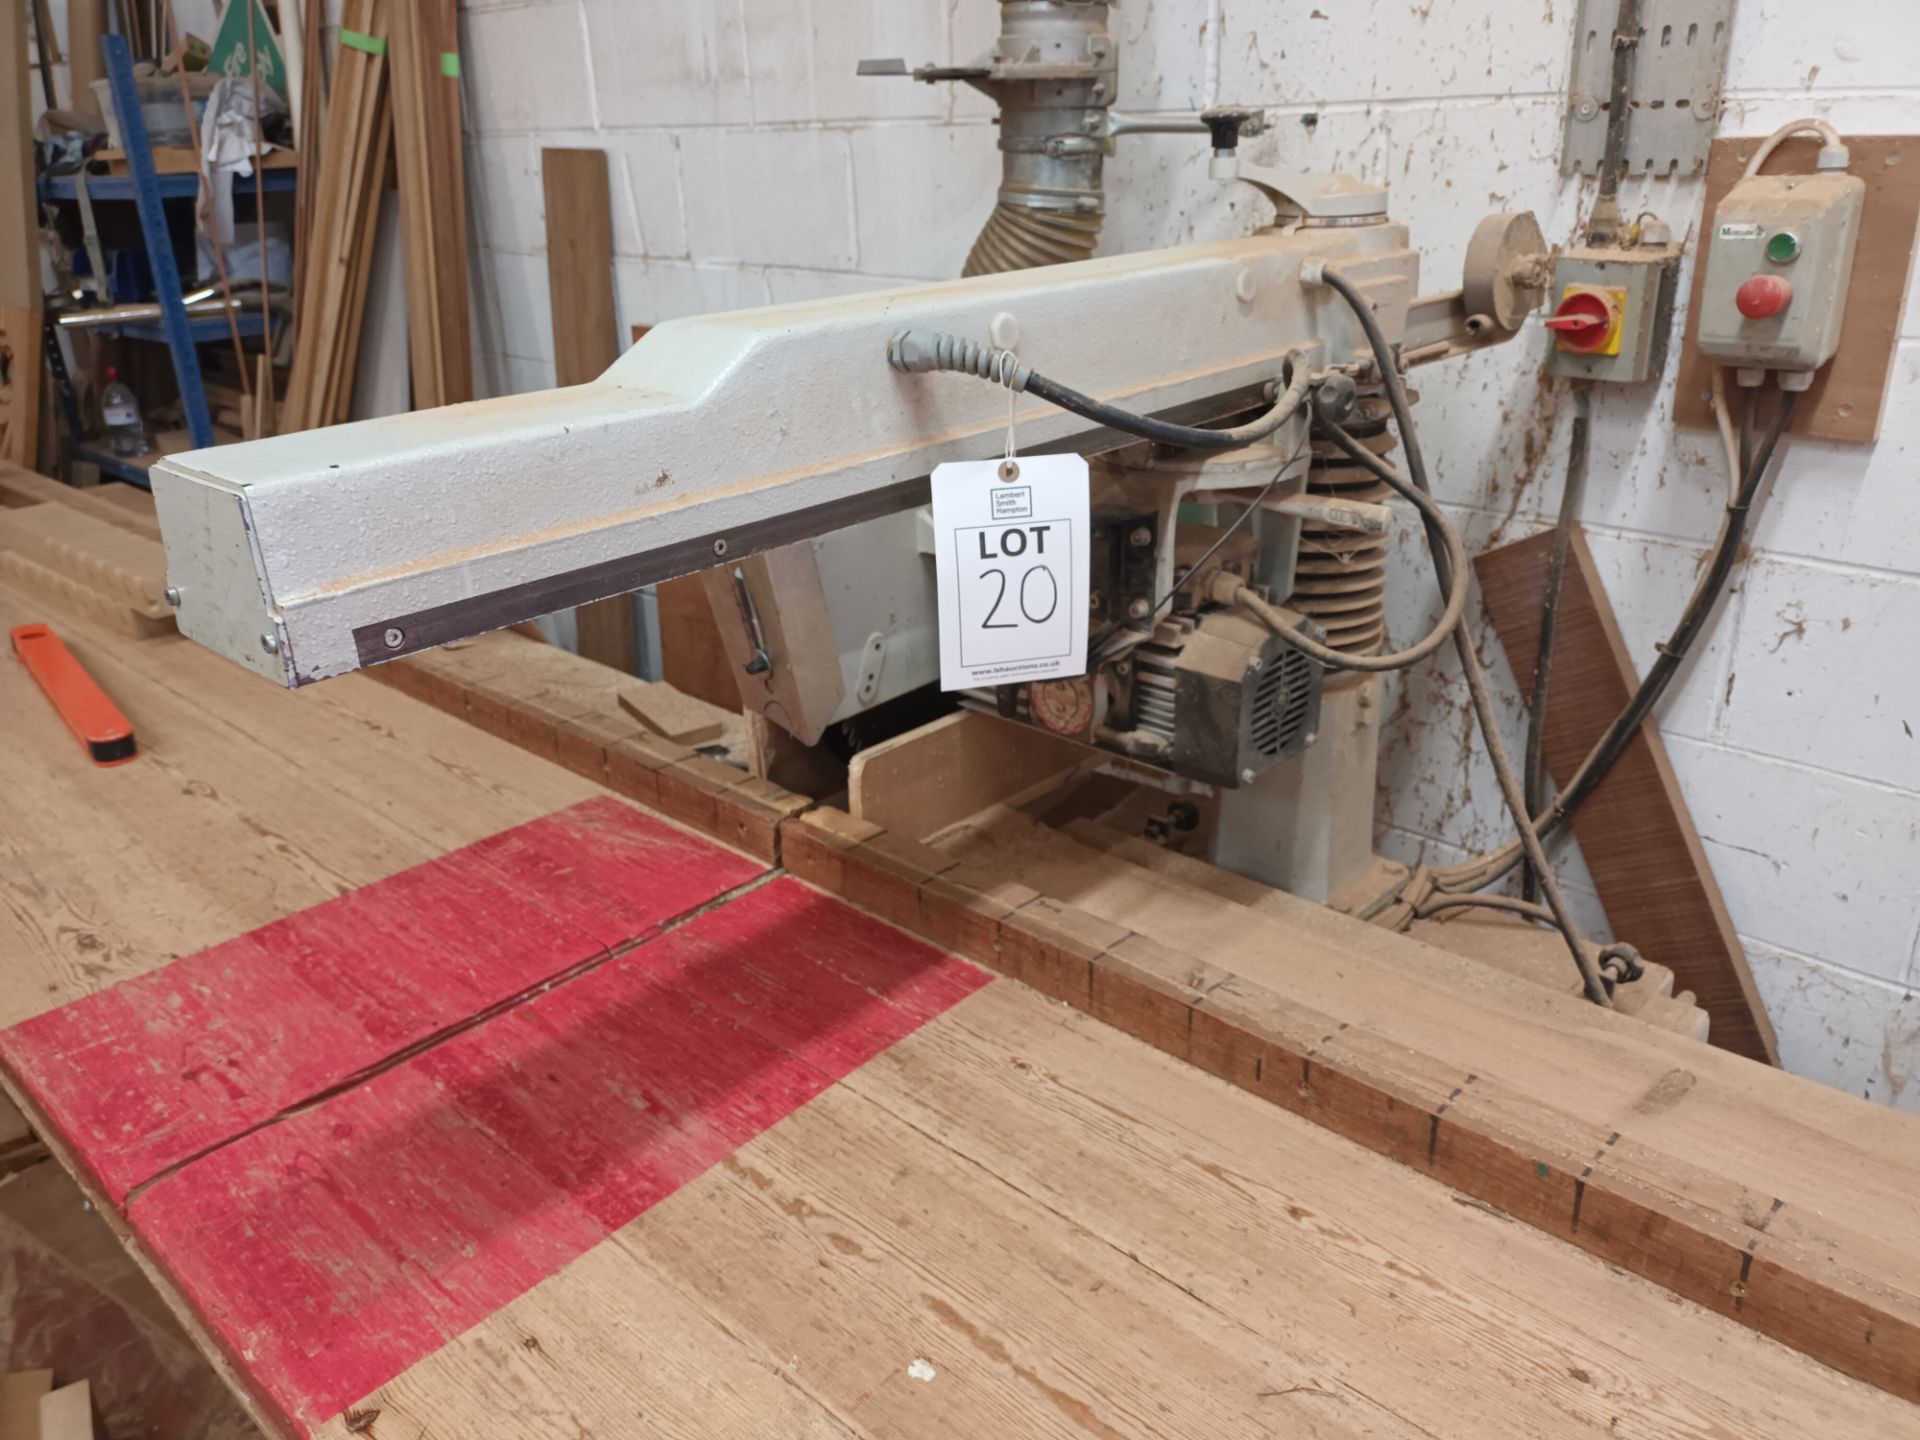 Stromab radial arm saw with custom built wood table NB: this item has no CE marking. The Purchaser - Image 3 of 4